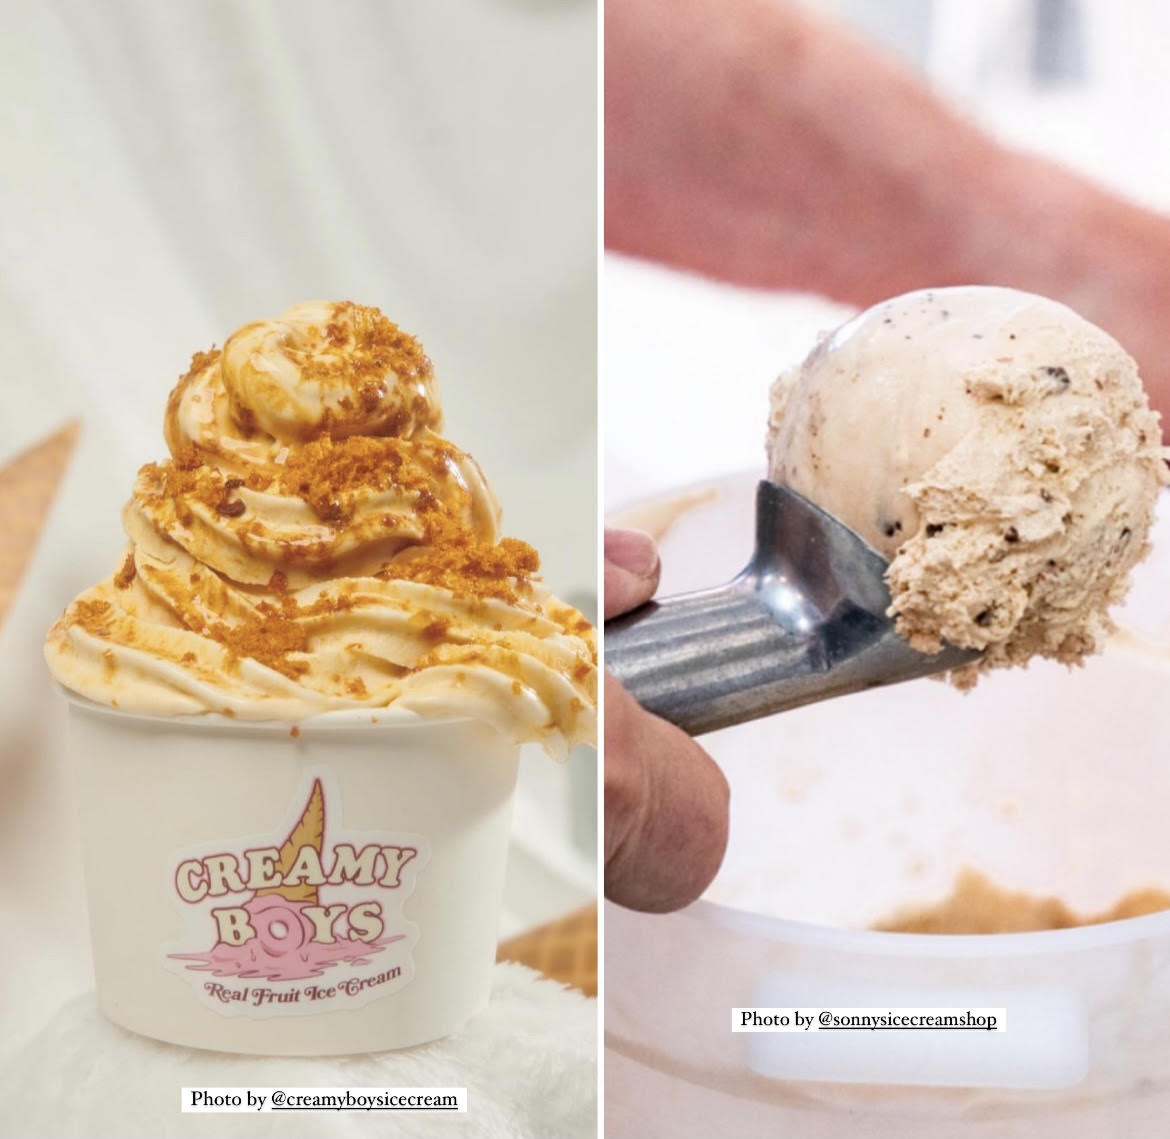 Sample 5 shops soft-serving ice cream (and nostalgia) in South